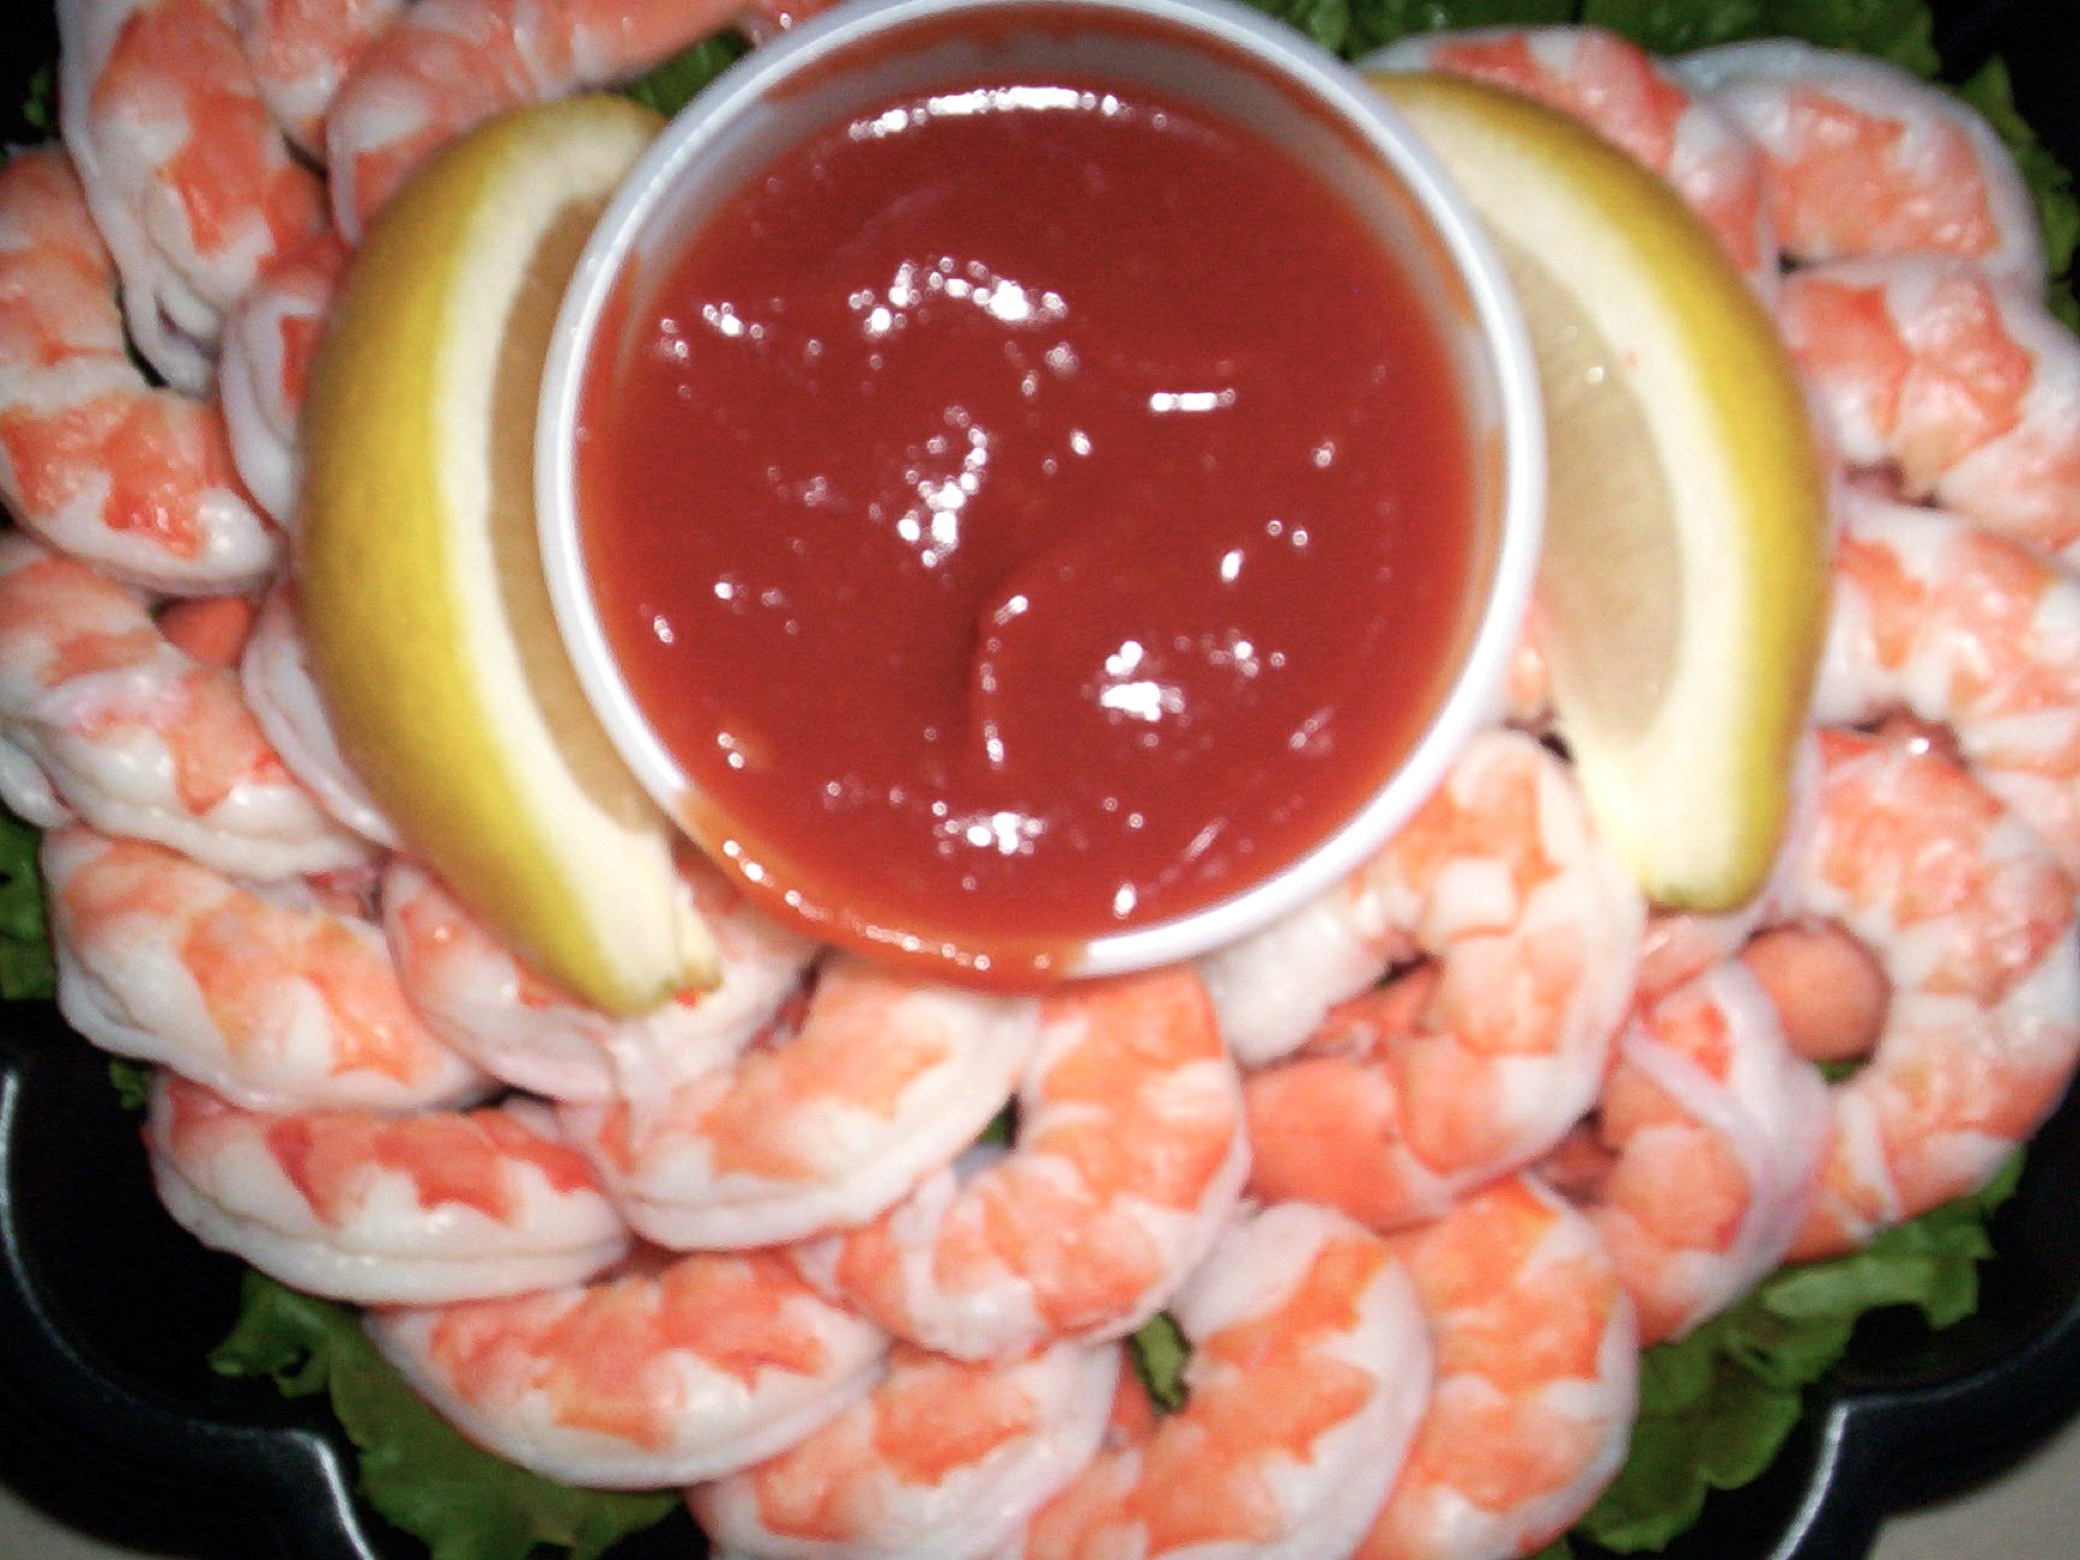 some shrimp and lettuce on a platter with a dipping sauce